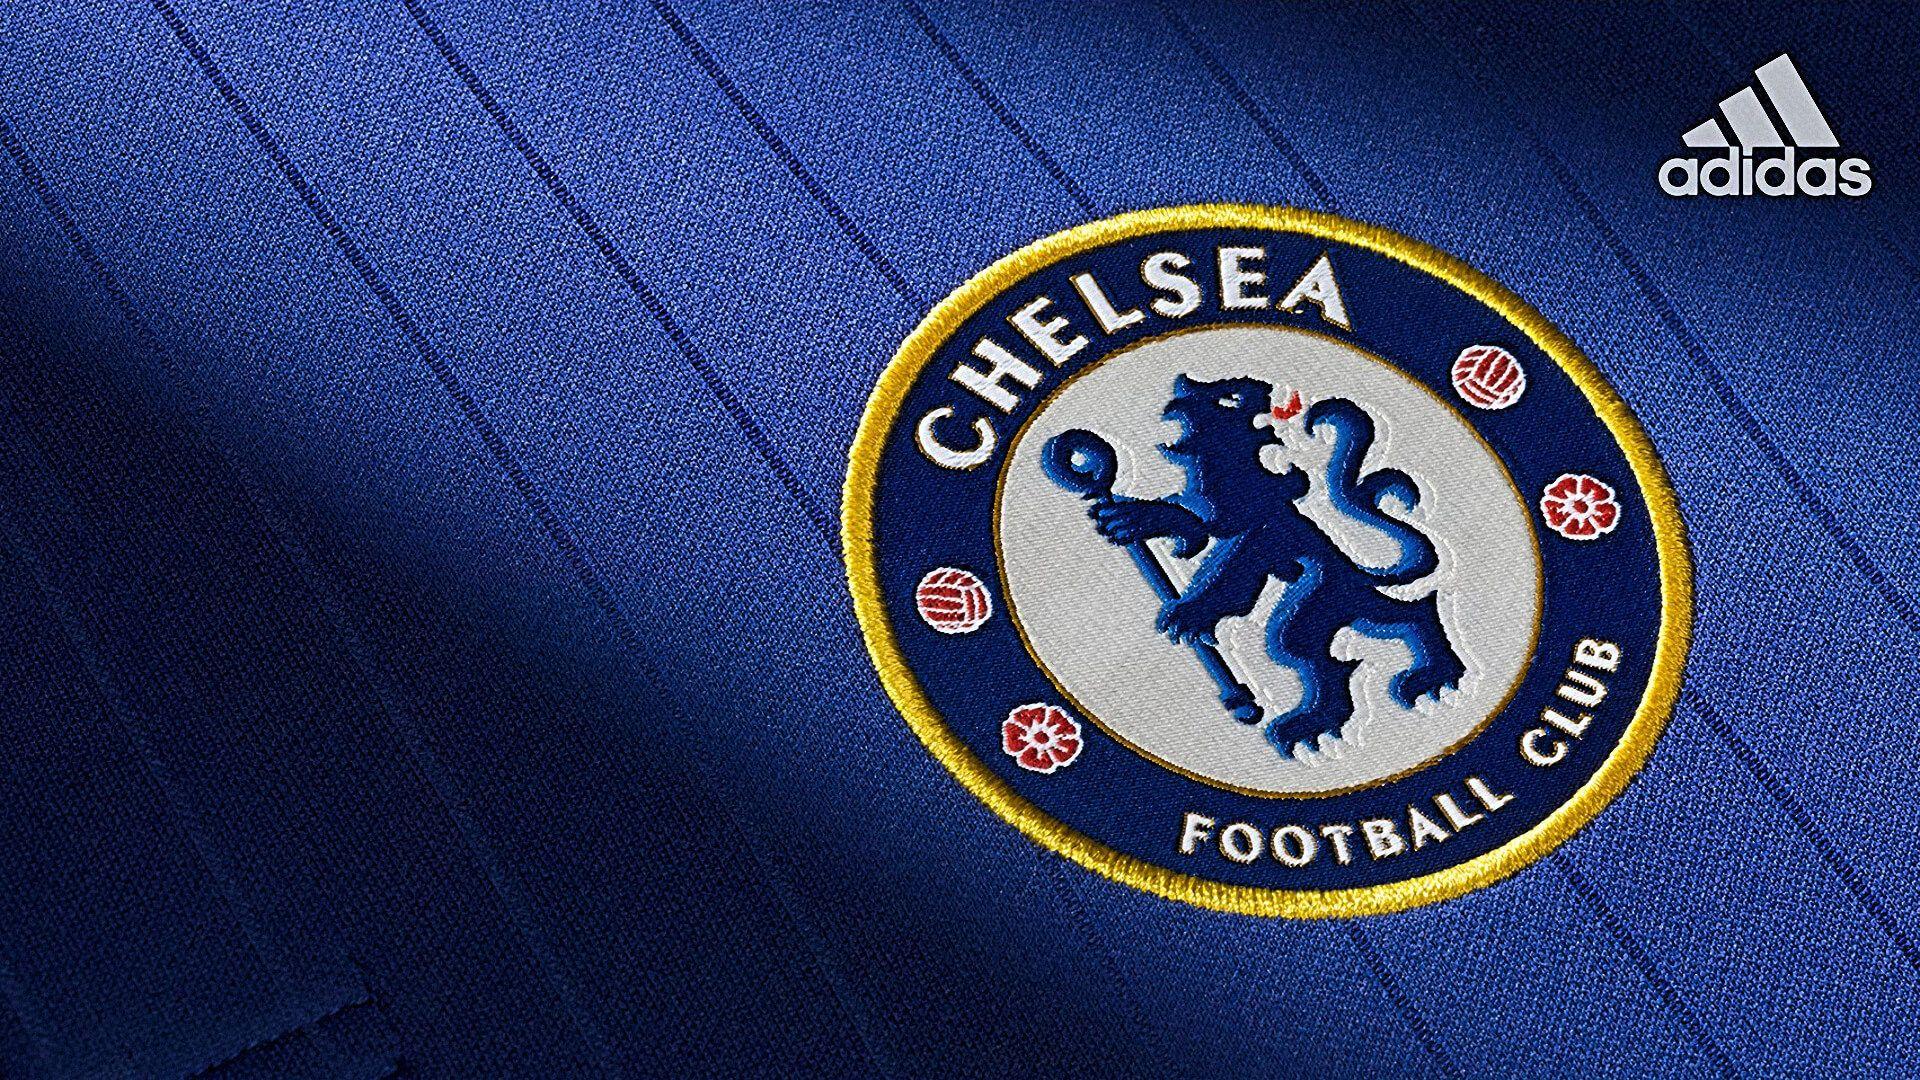 Football Wallpapers Chelsea FC 75 pictures